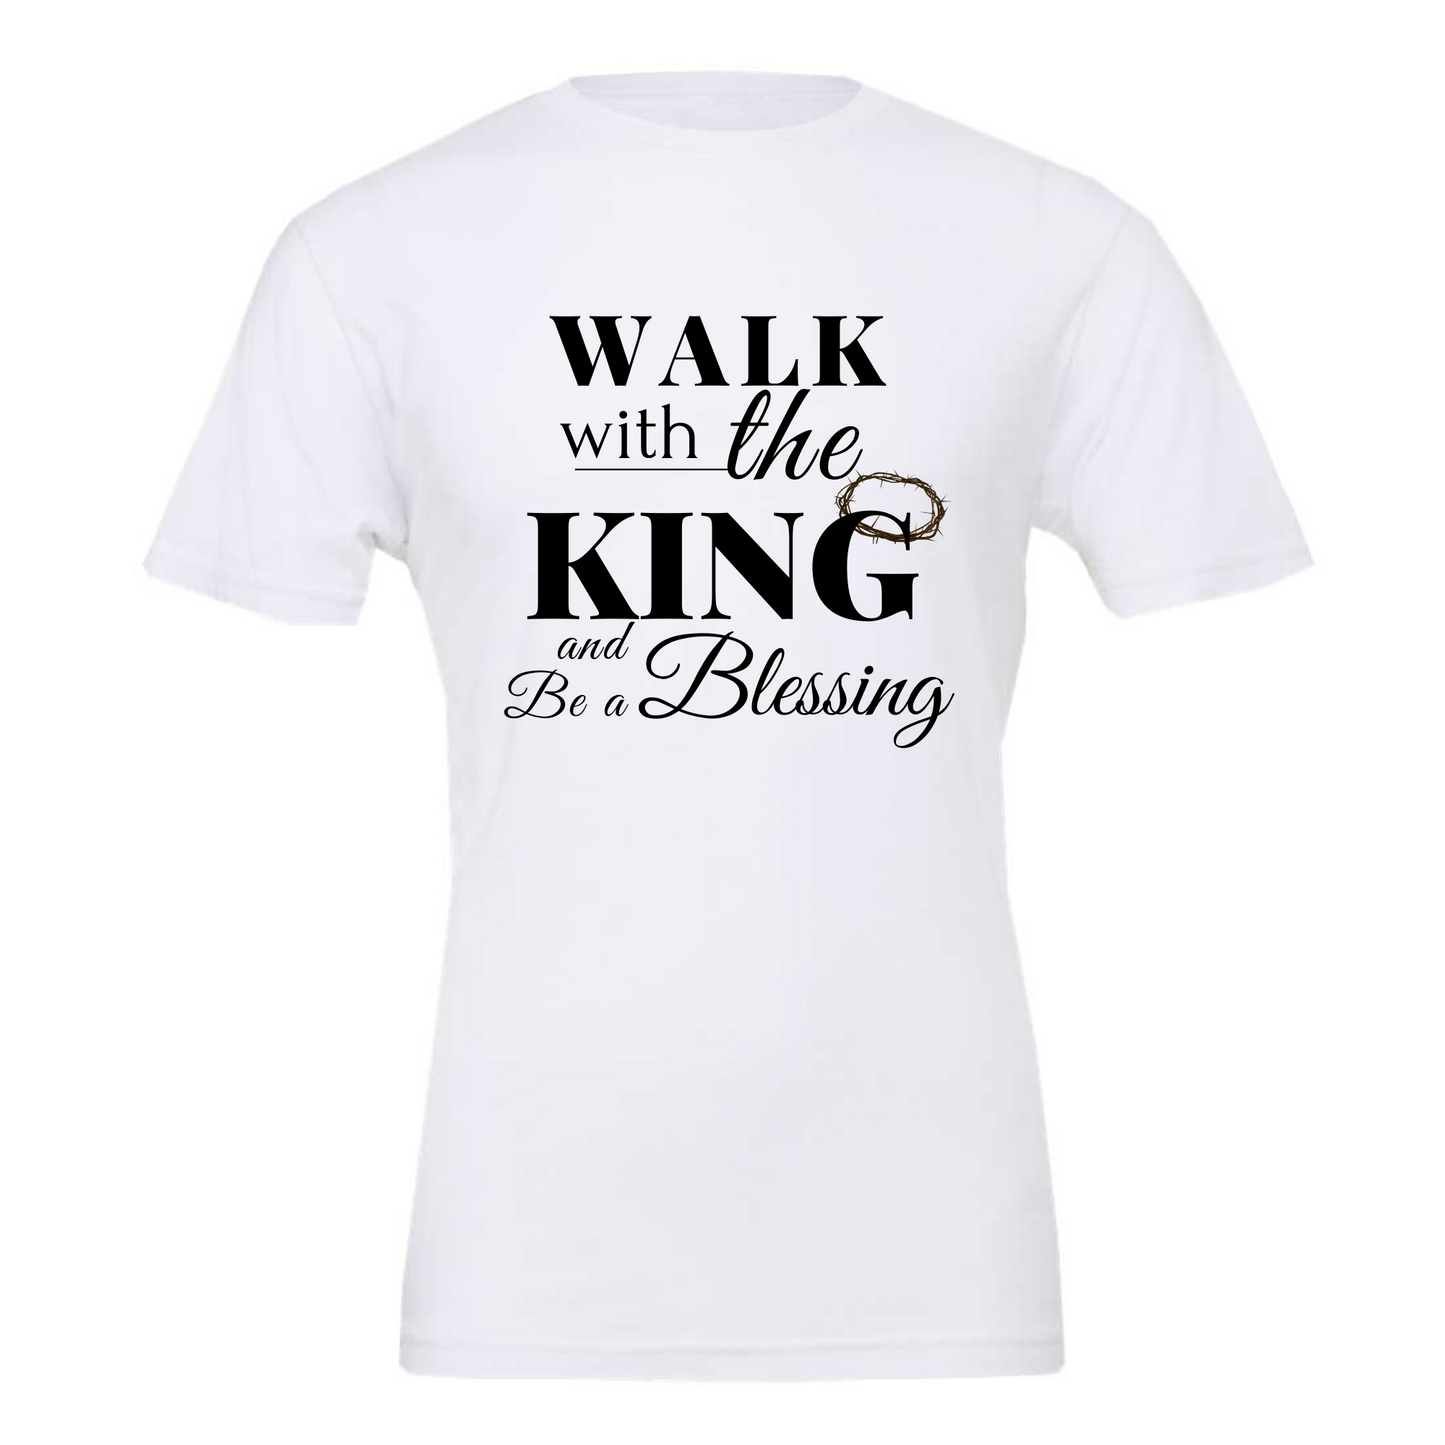 WALK with The KING